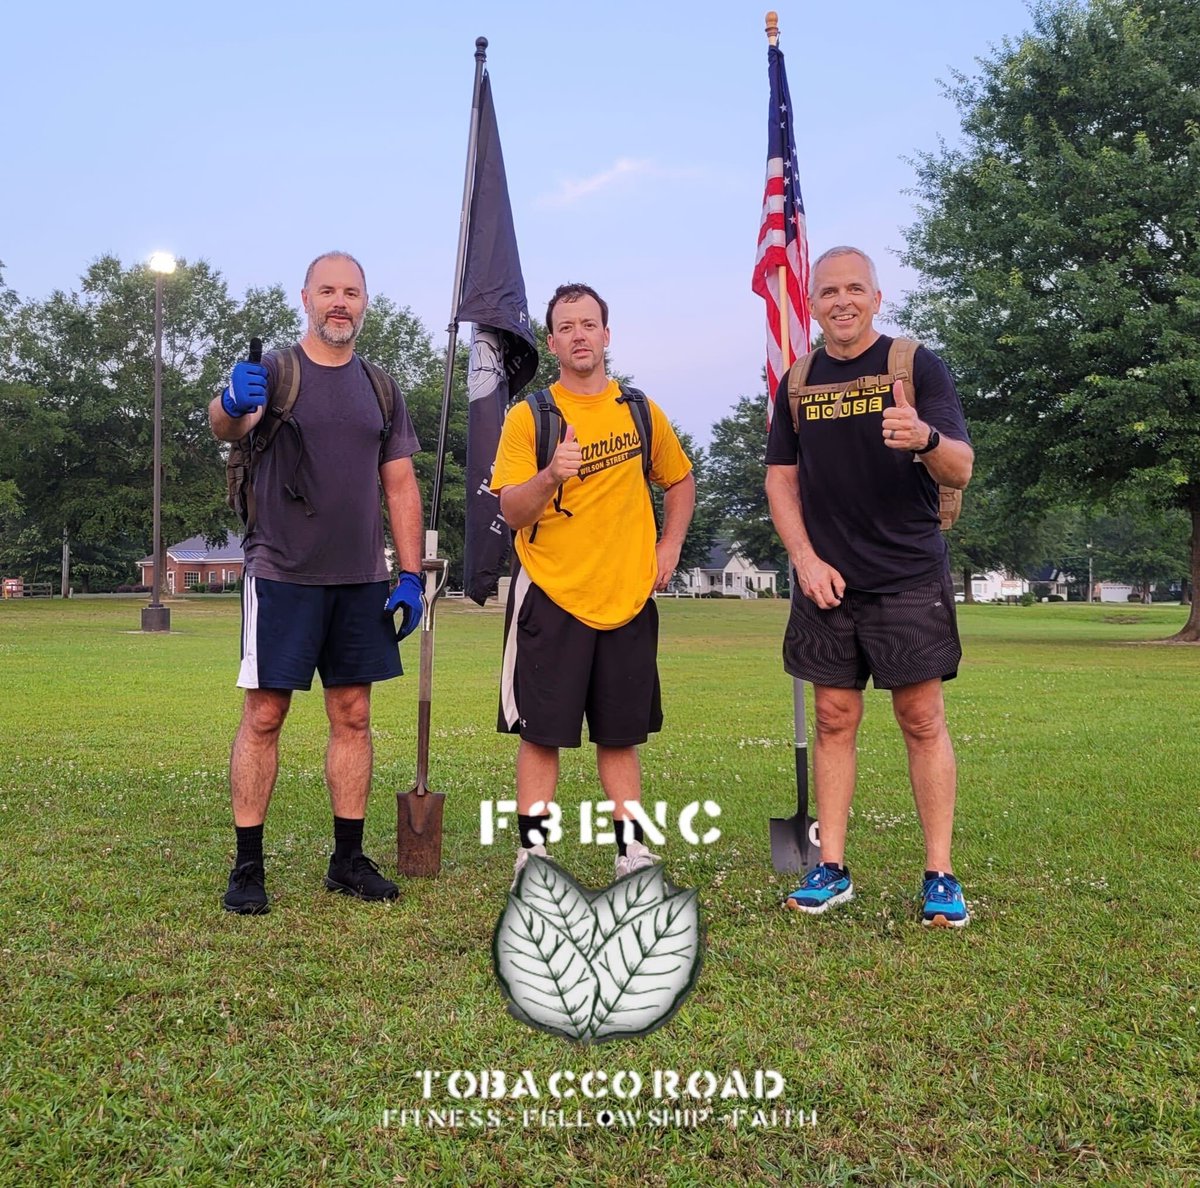 51 #f3enc PAX with 4 @f3fng’s #f3nation #f3counts 

11 @ #ovaloffice
11 @ #watchtower (4 @heavy_drop_training)
7 @ #broga
3 @ #tobaccoroad
9 @ #theflagship
10 @ #firstaid